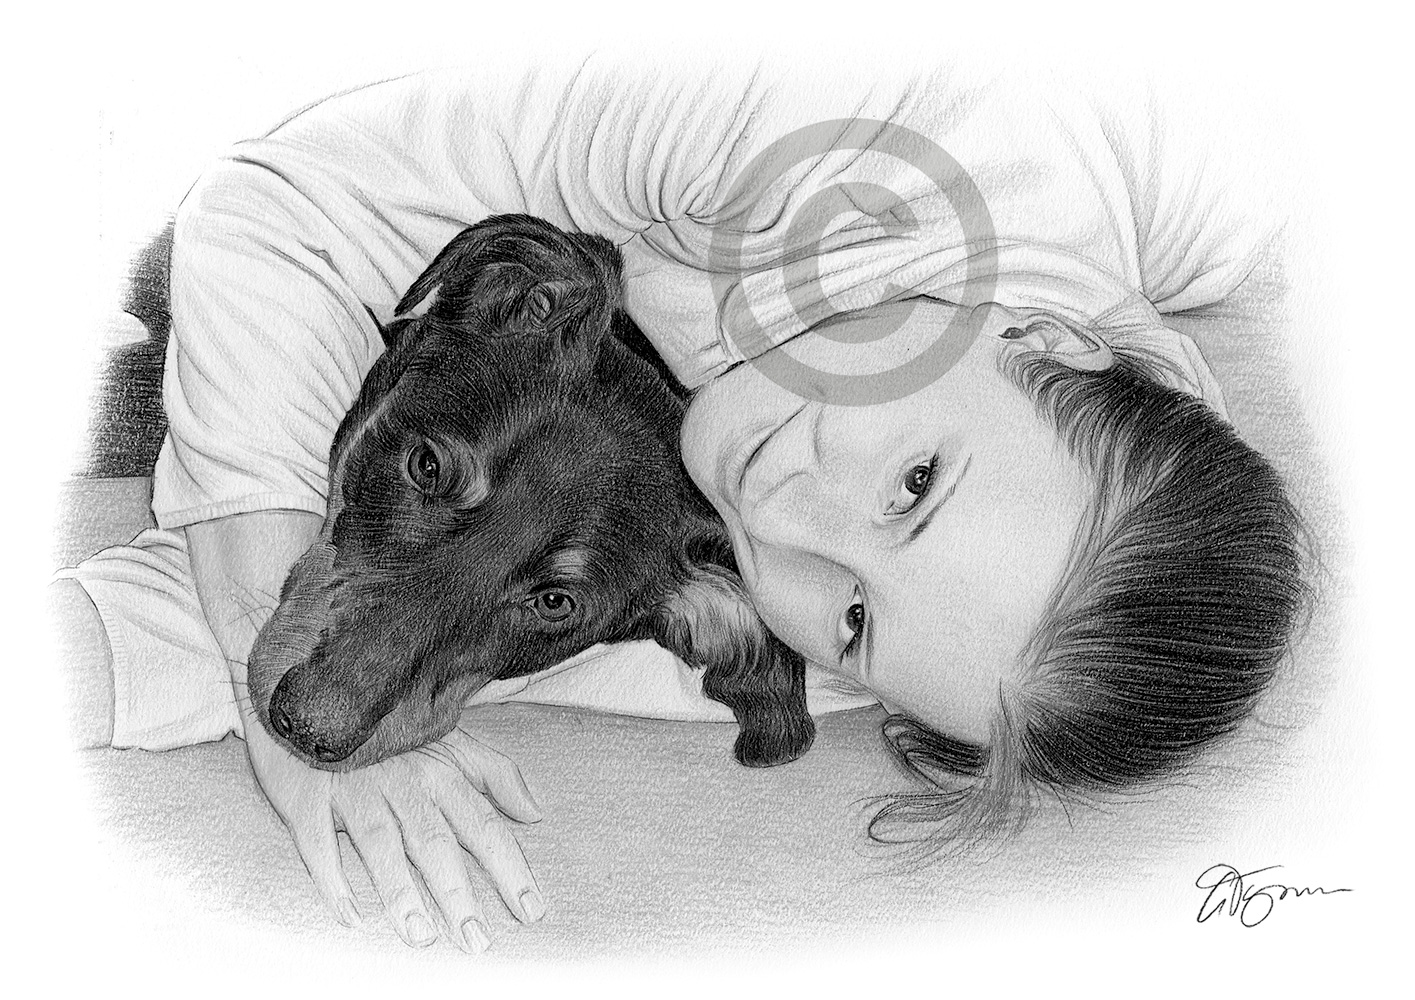 Pencil drawing commission of a dog and girl by artist Gary Tymon